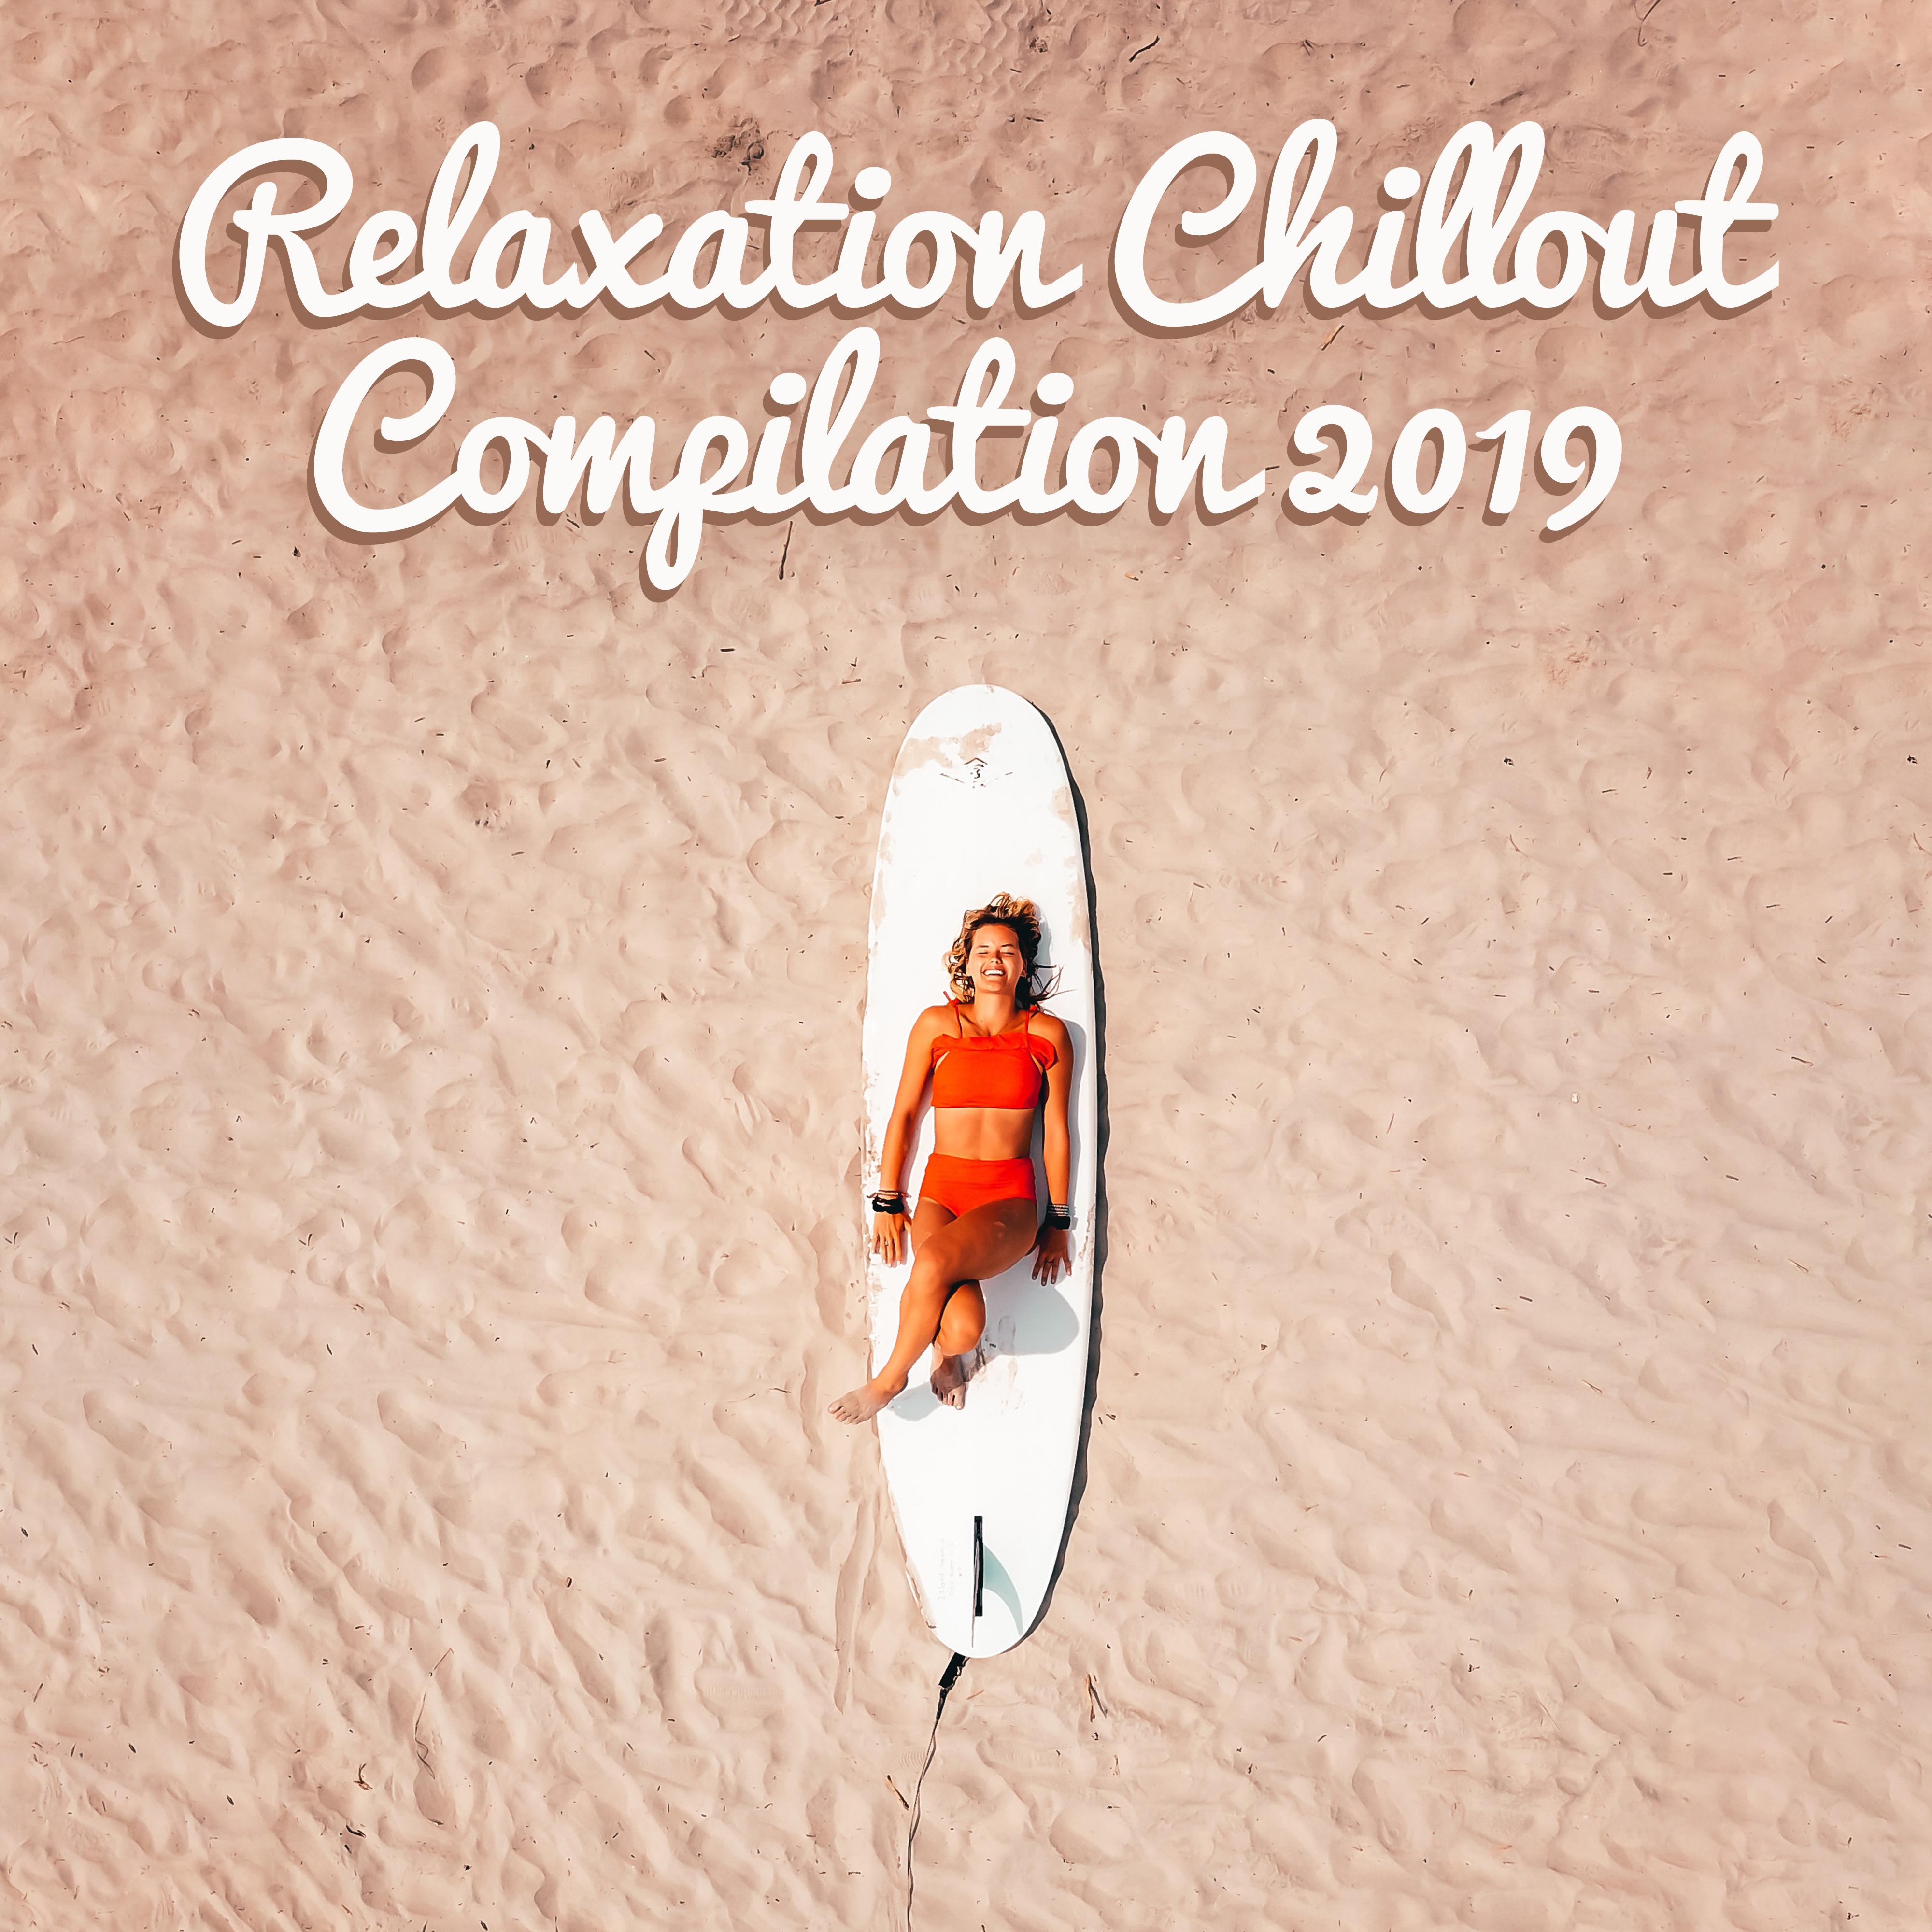 Relaxation Chillout Compilation 2019: 15 Electronic Smooth Chill Out Vibes for Total Calming Down, Stress Reducing Beats, Beach Nice Time Music